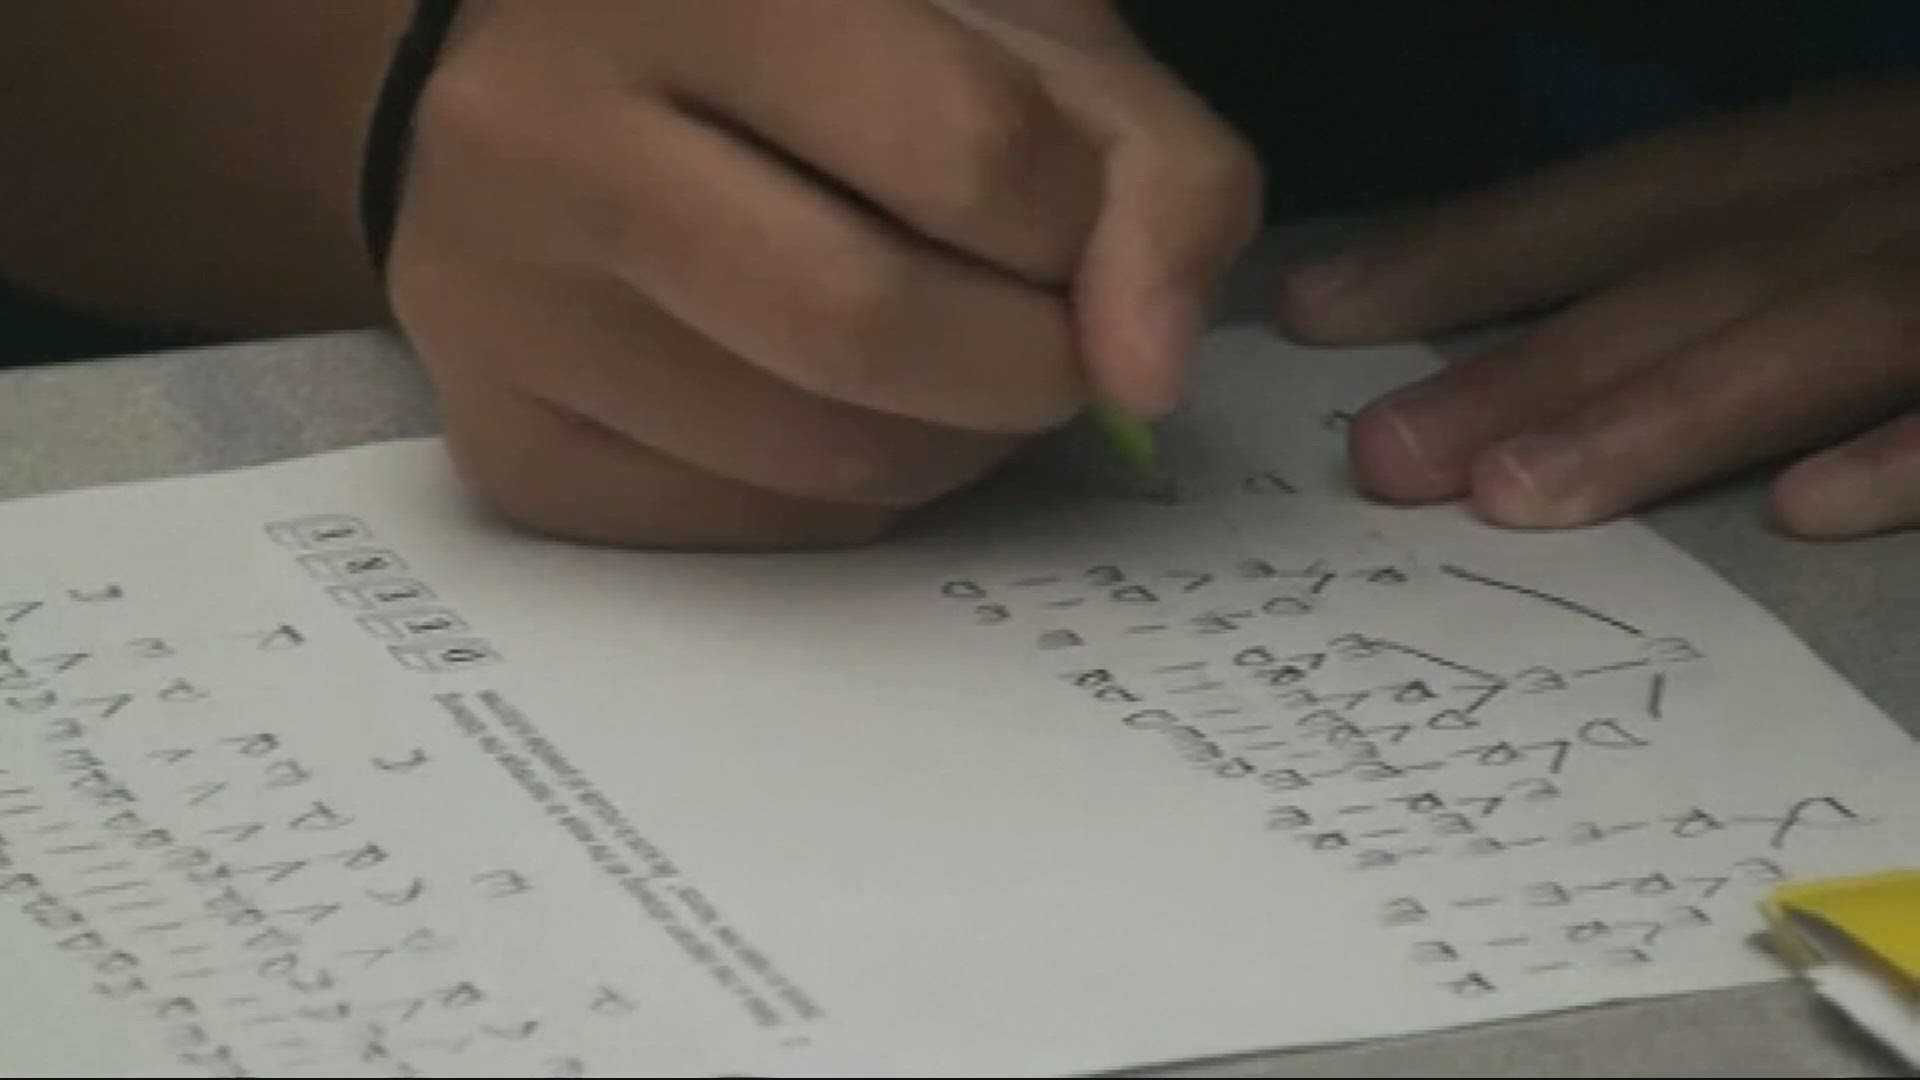 The Oregon Department of Education released new numbers showing spring test scores improved compared to the year before, but they're far below scores in 2019.